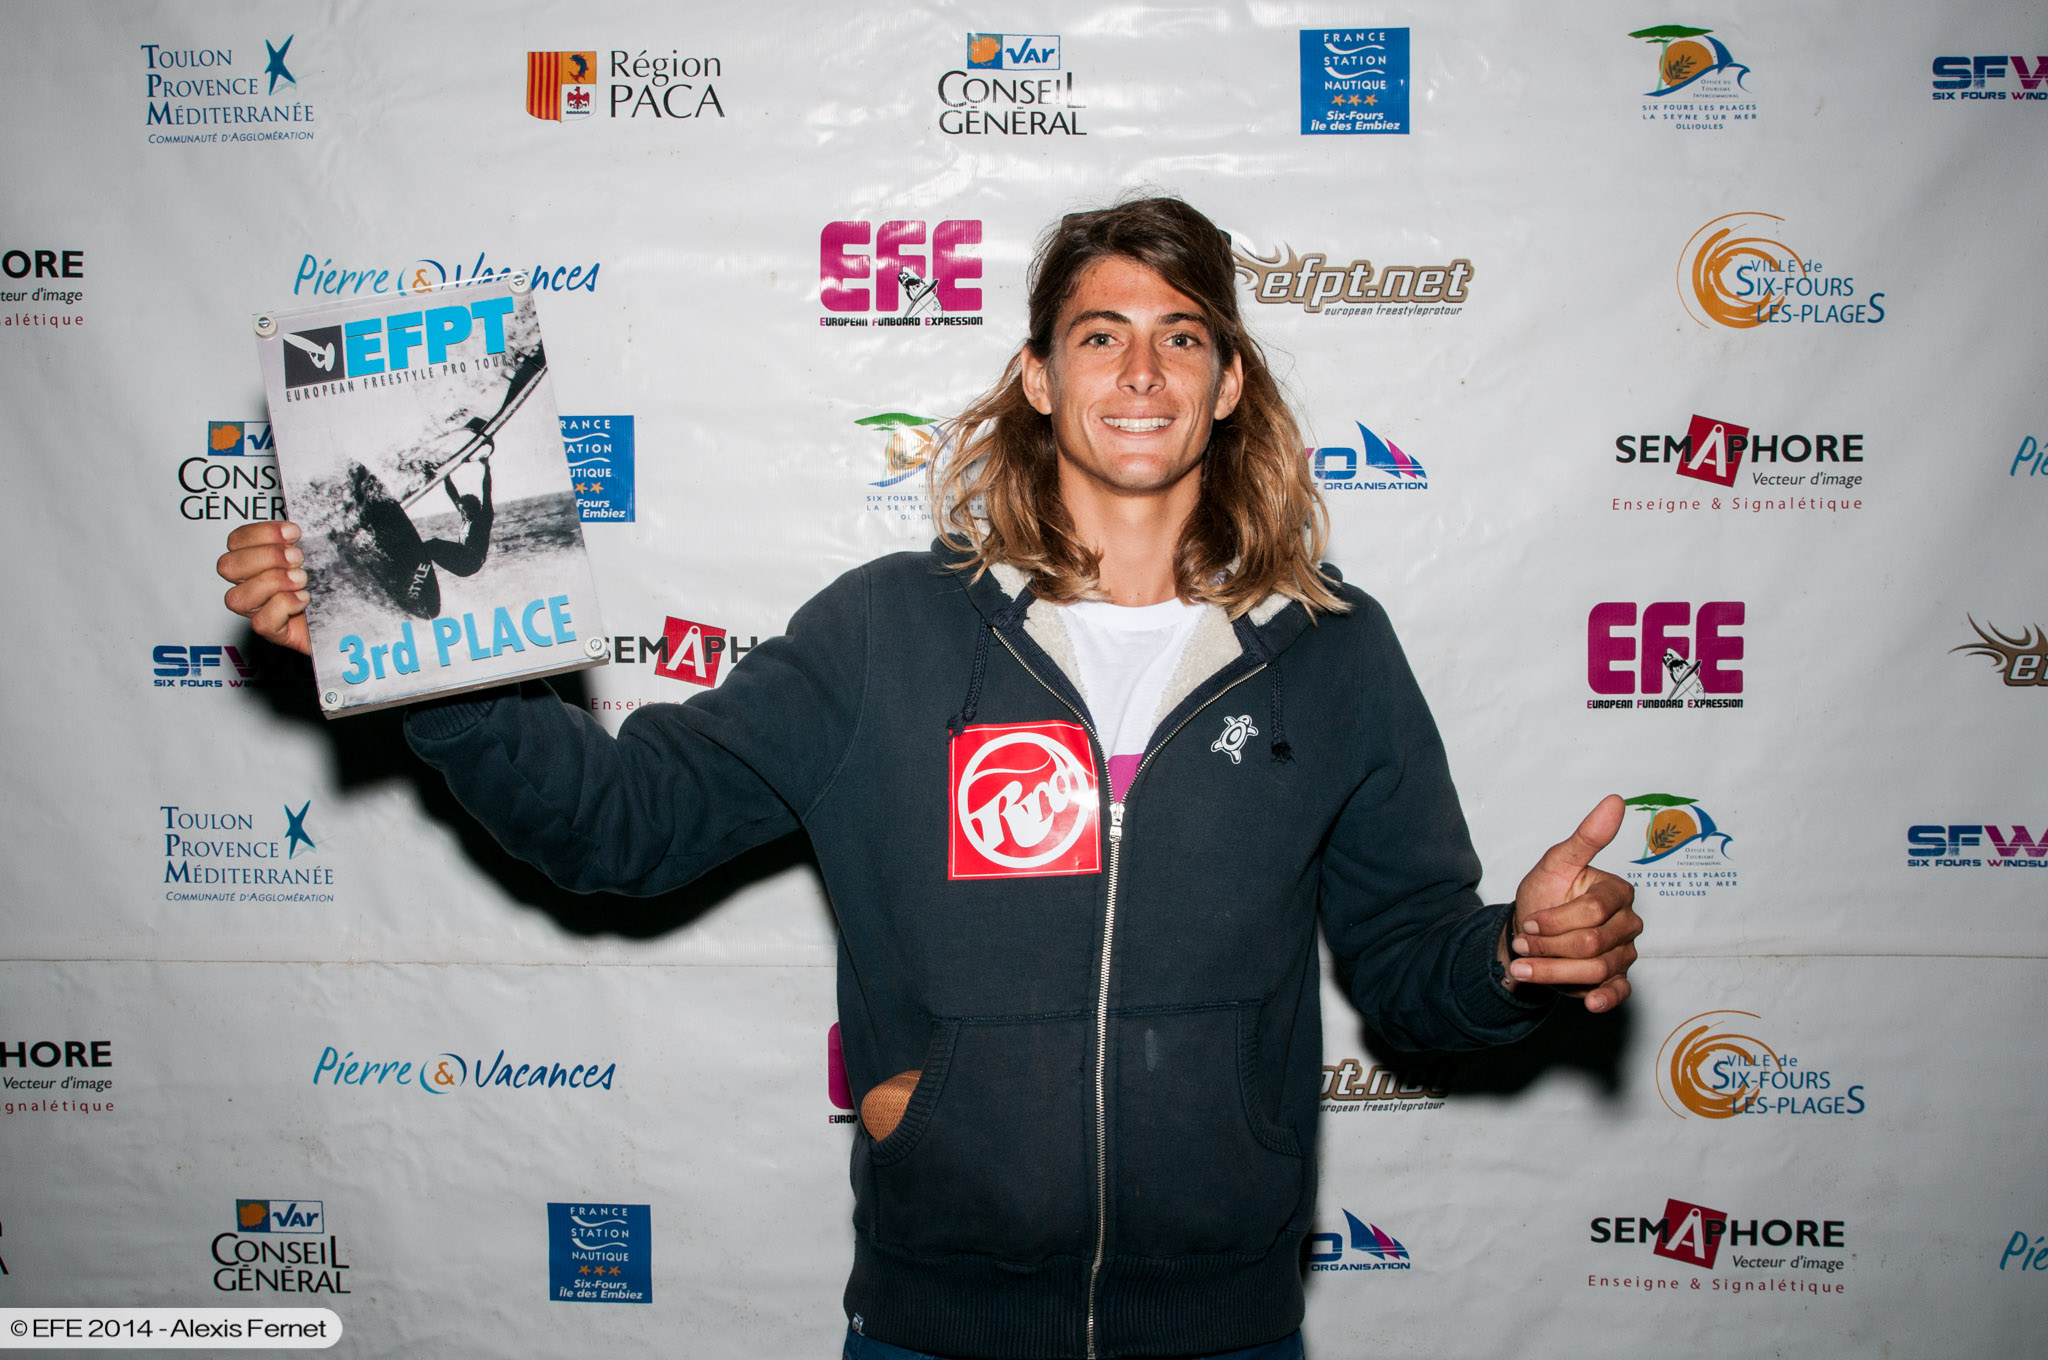 Jacopo Testa from Italy takes 3rd place overall 2014